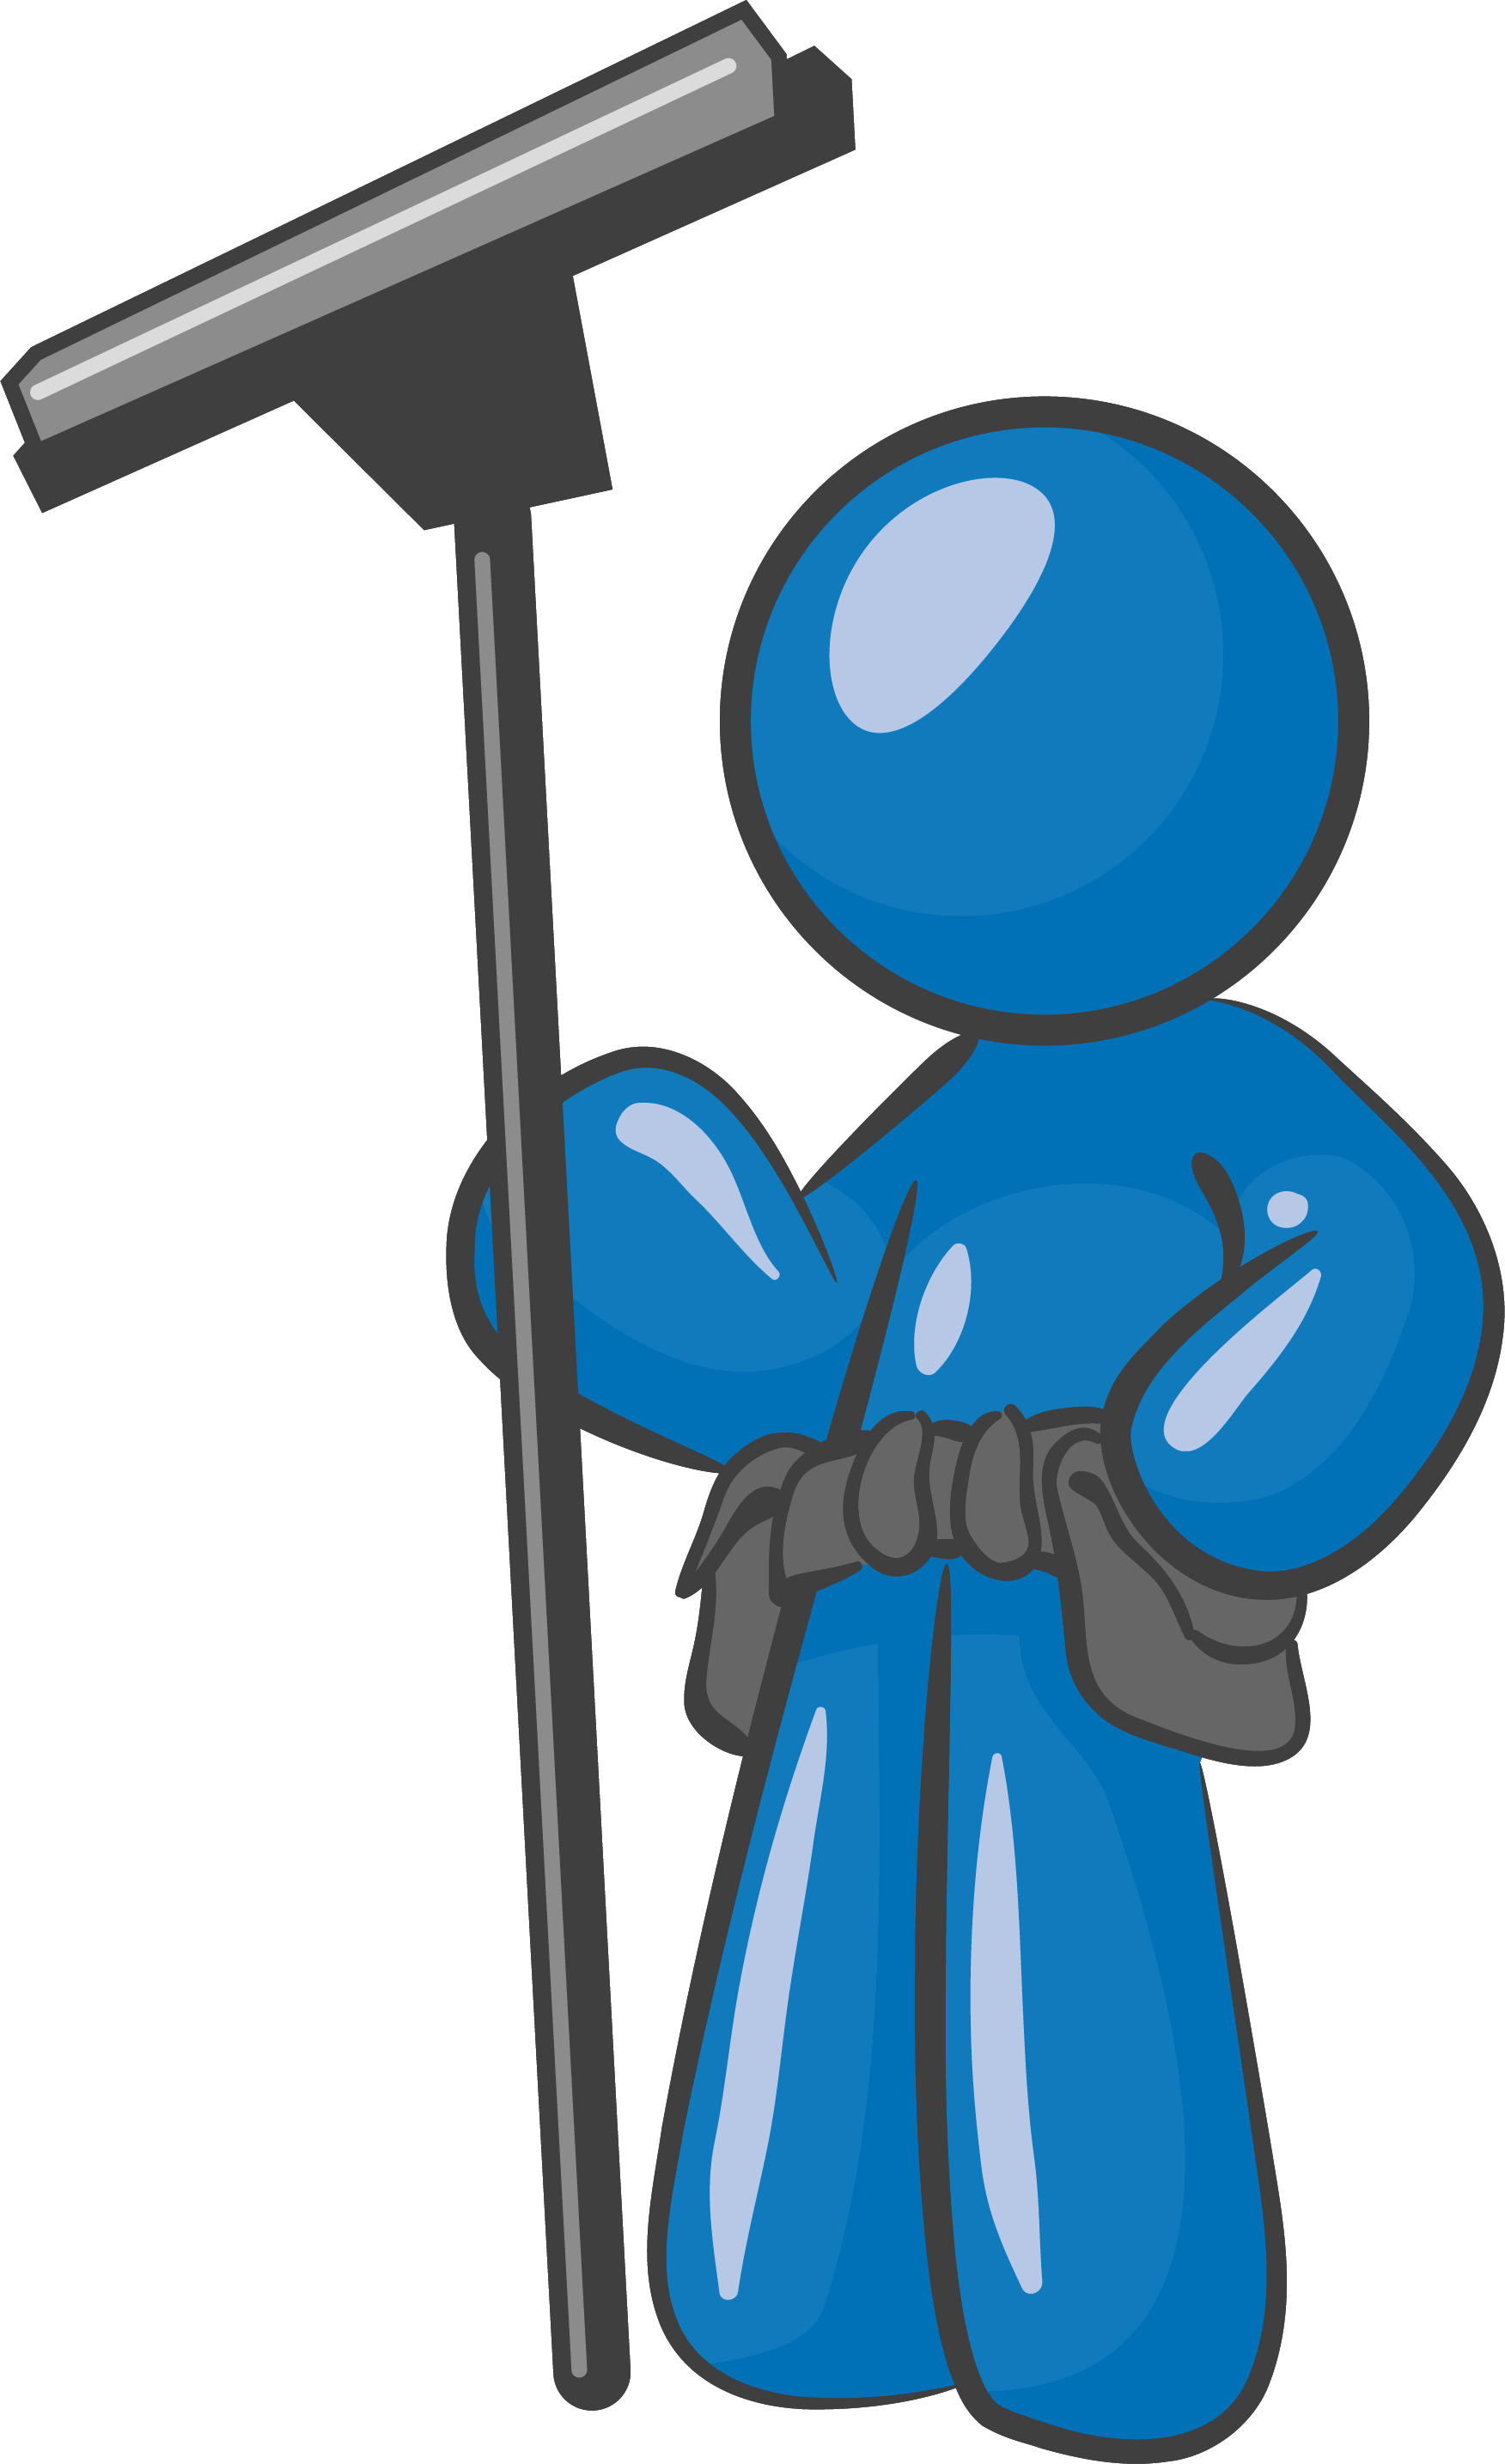 Clip Arts Related To : window cleaner clipart. view all Window Cleaning...